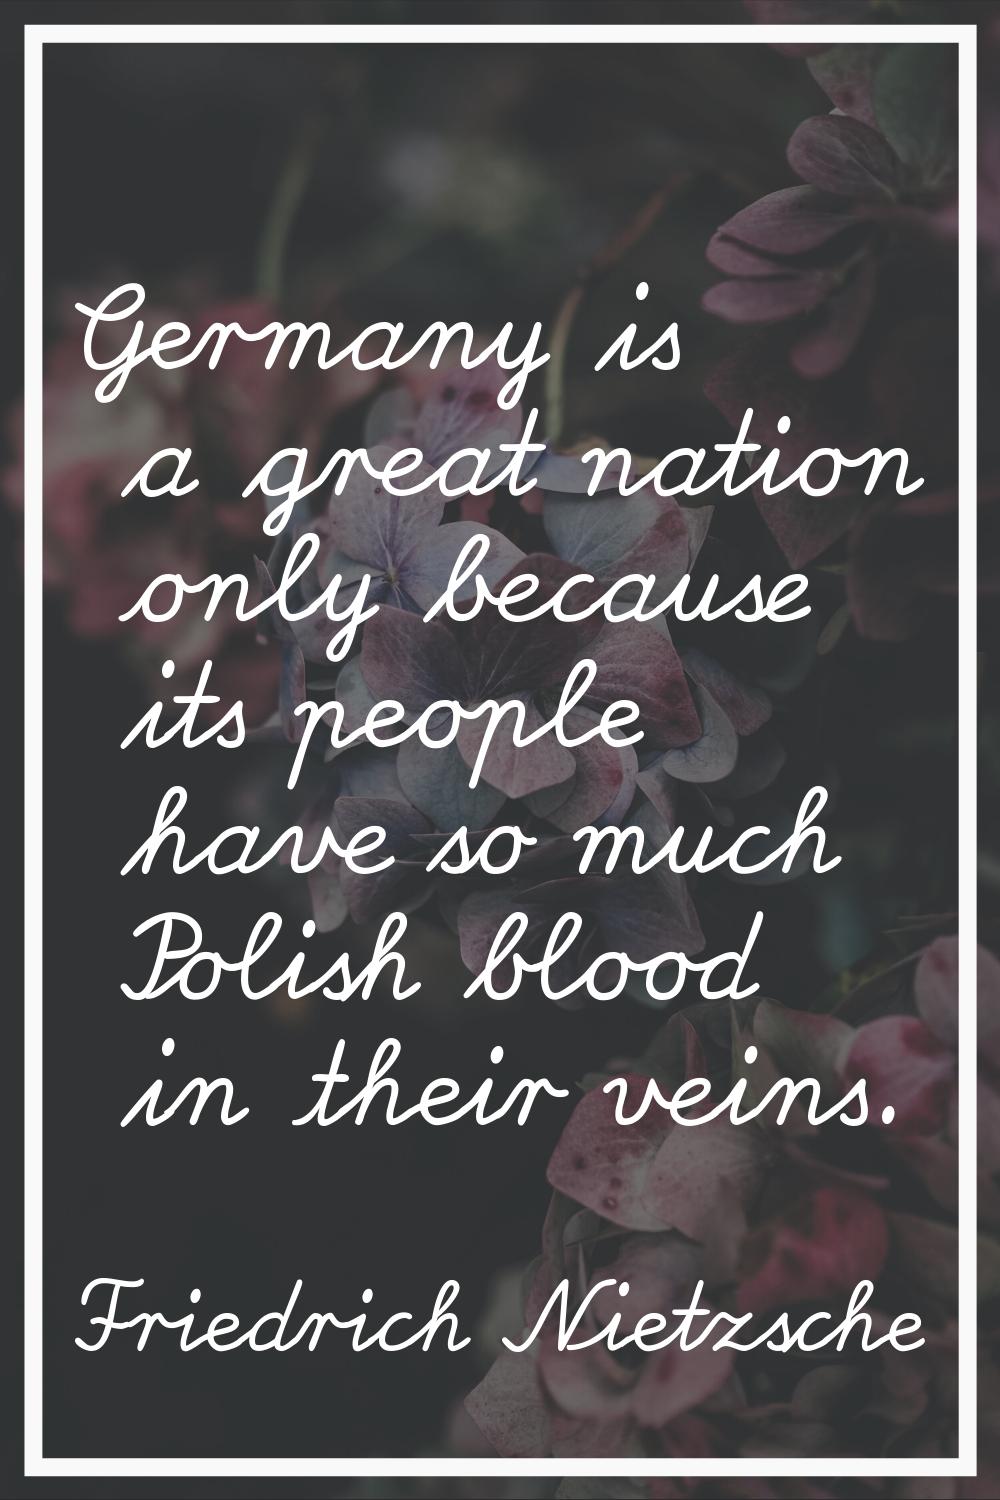 Germany is a great nation only because its people have so much Polish blood in their veins.